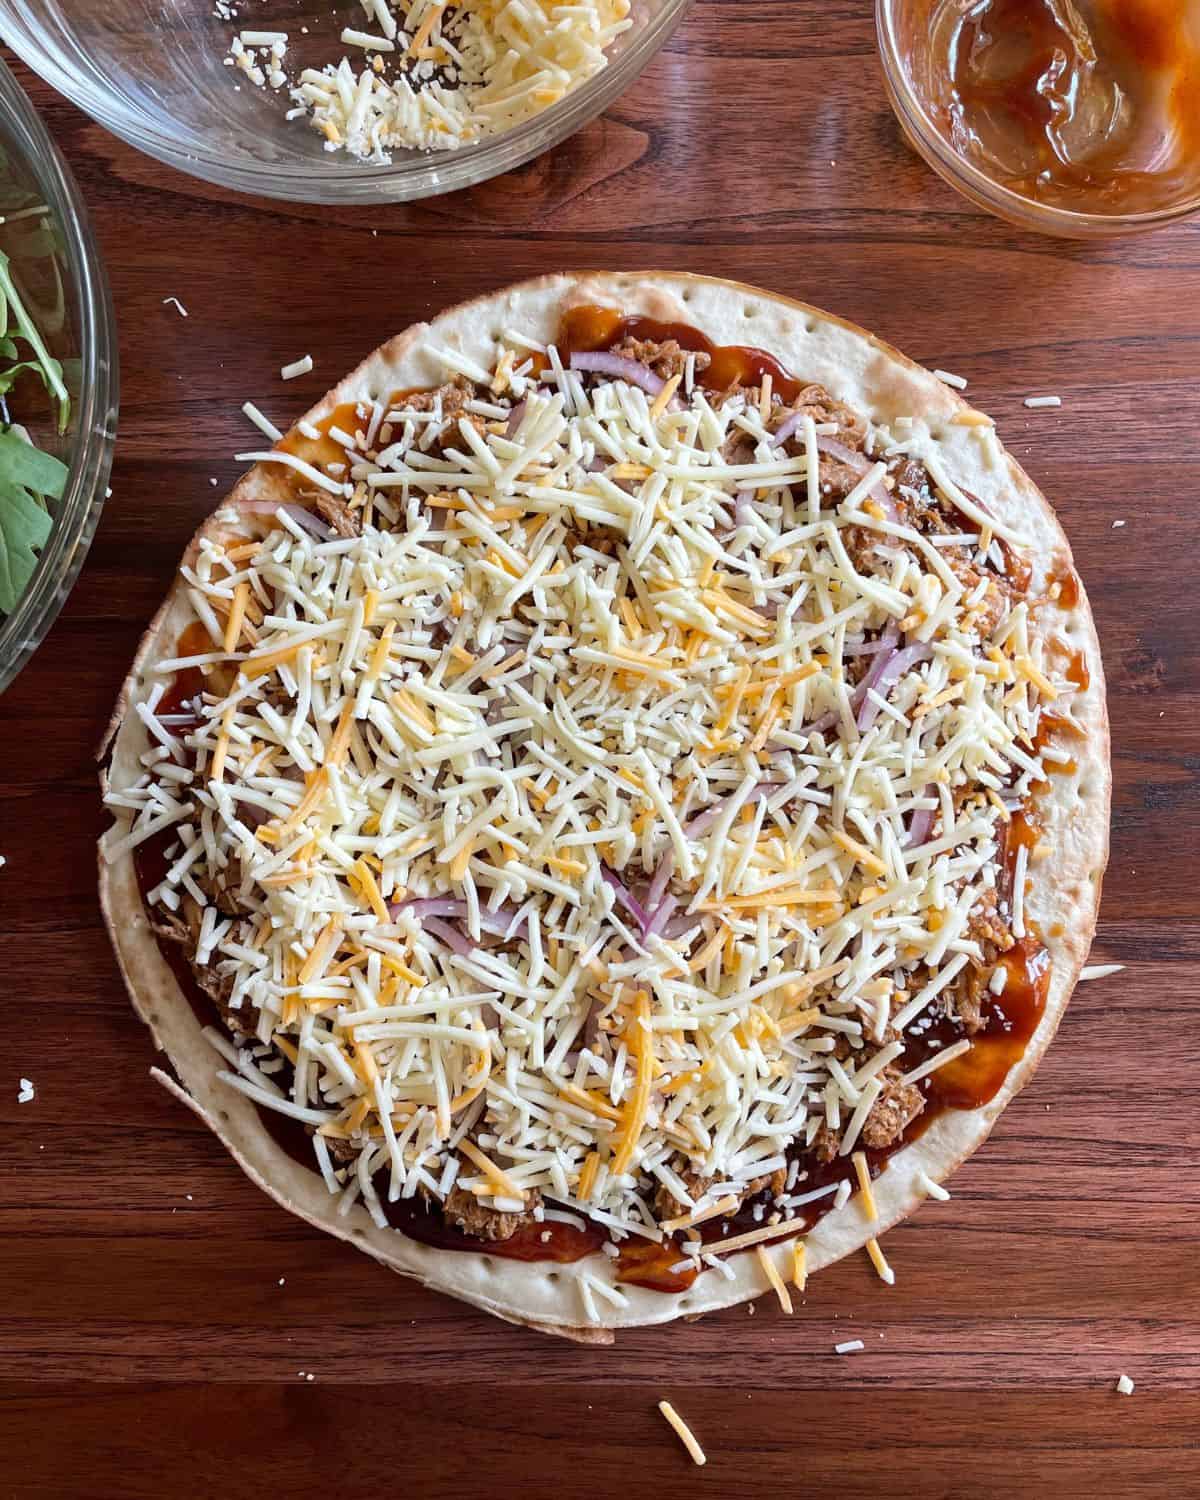 Pizza shell topped with sauce, pork, sliced red onions, and cheddar cheese.